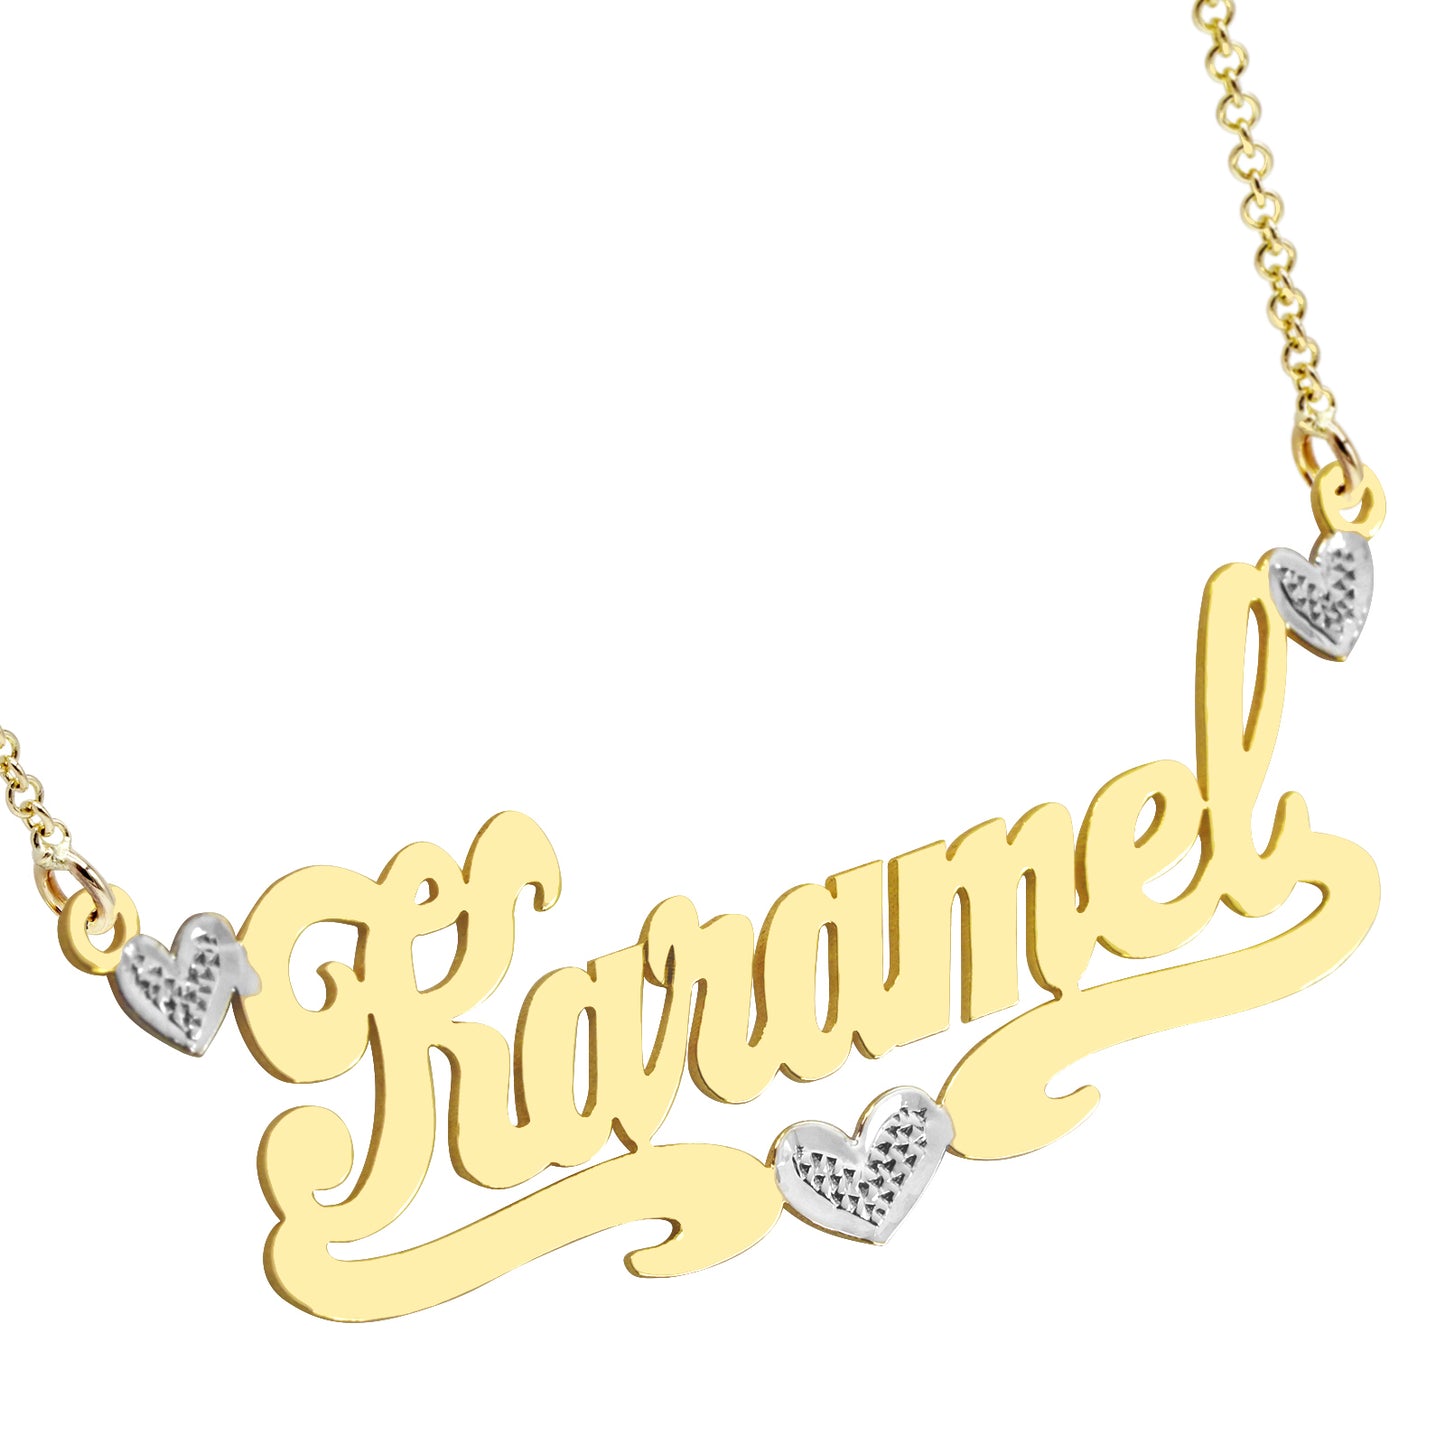 Custom14kt. Gold and Diamond Nameplate Necklace with Heart Flourish with Cable Chain